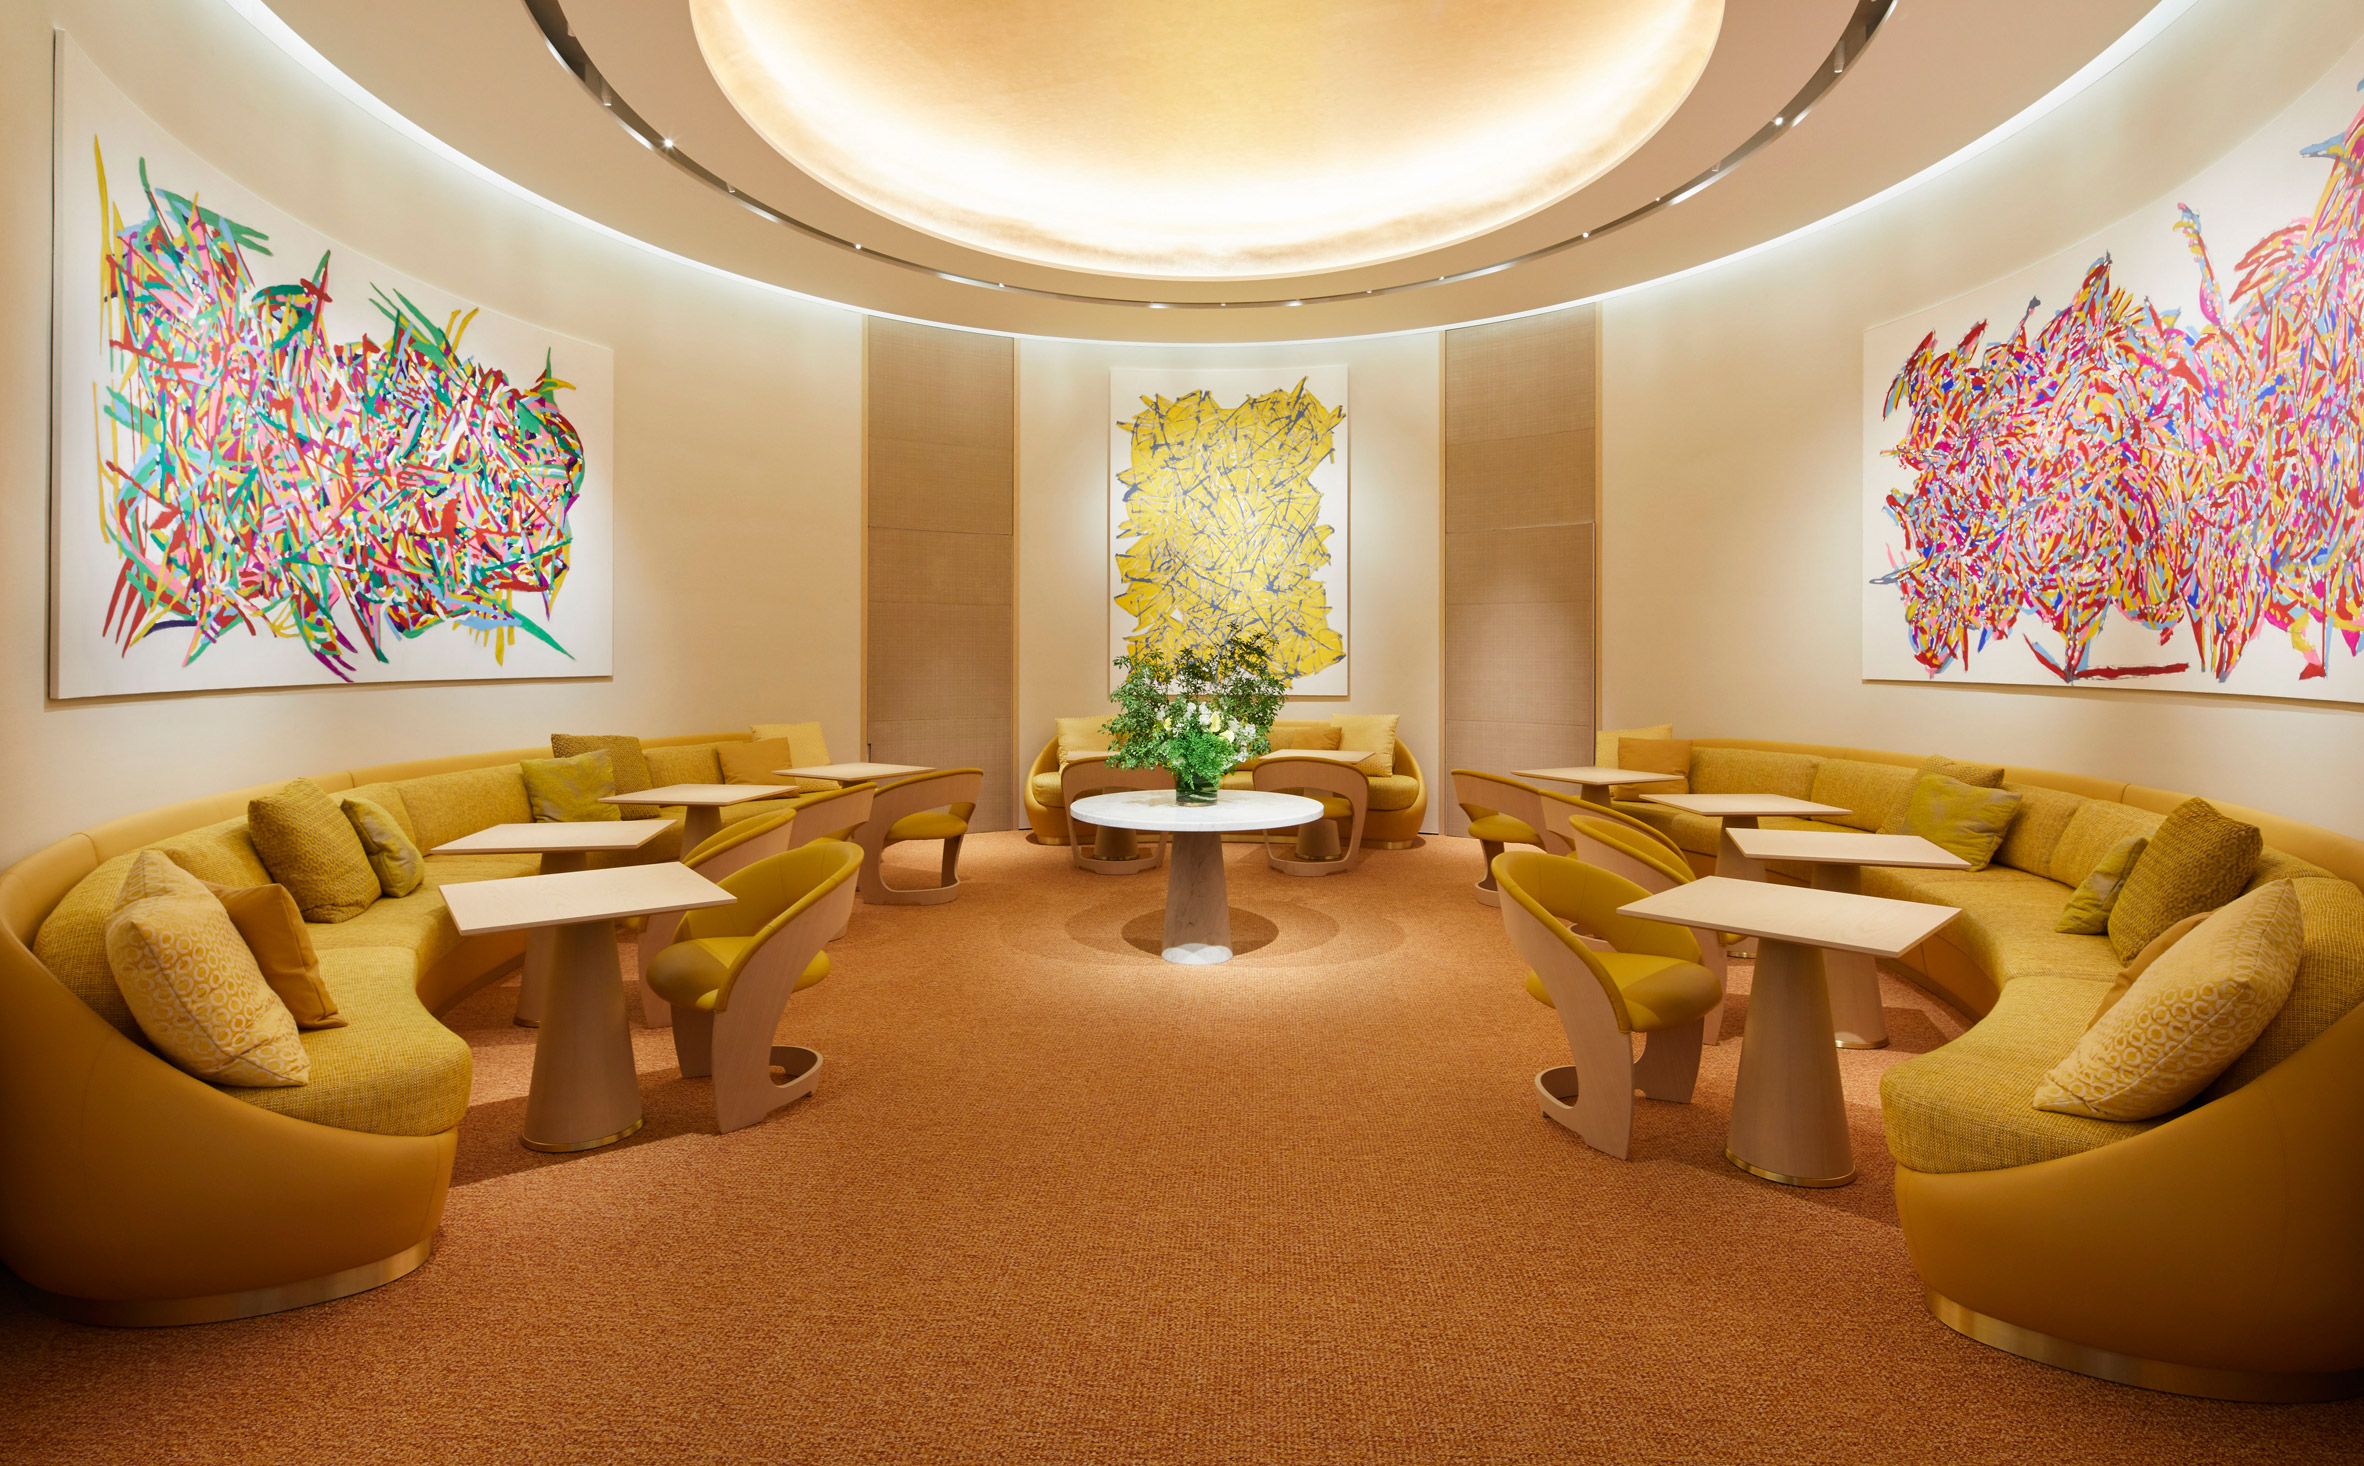 Sugalabo V is Louis Vuitton's inaugural in-store restaurant